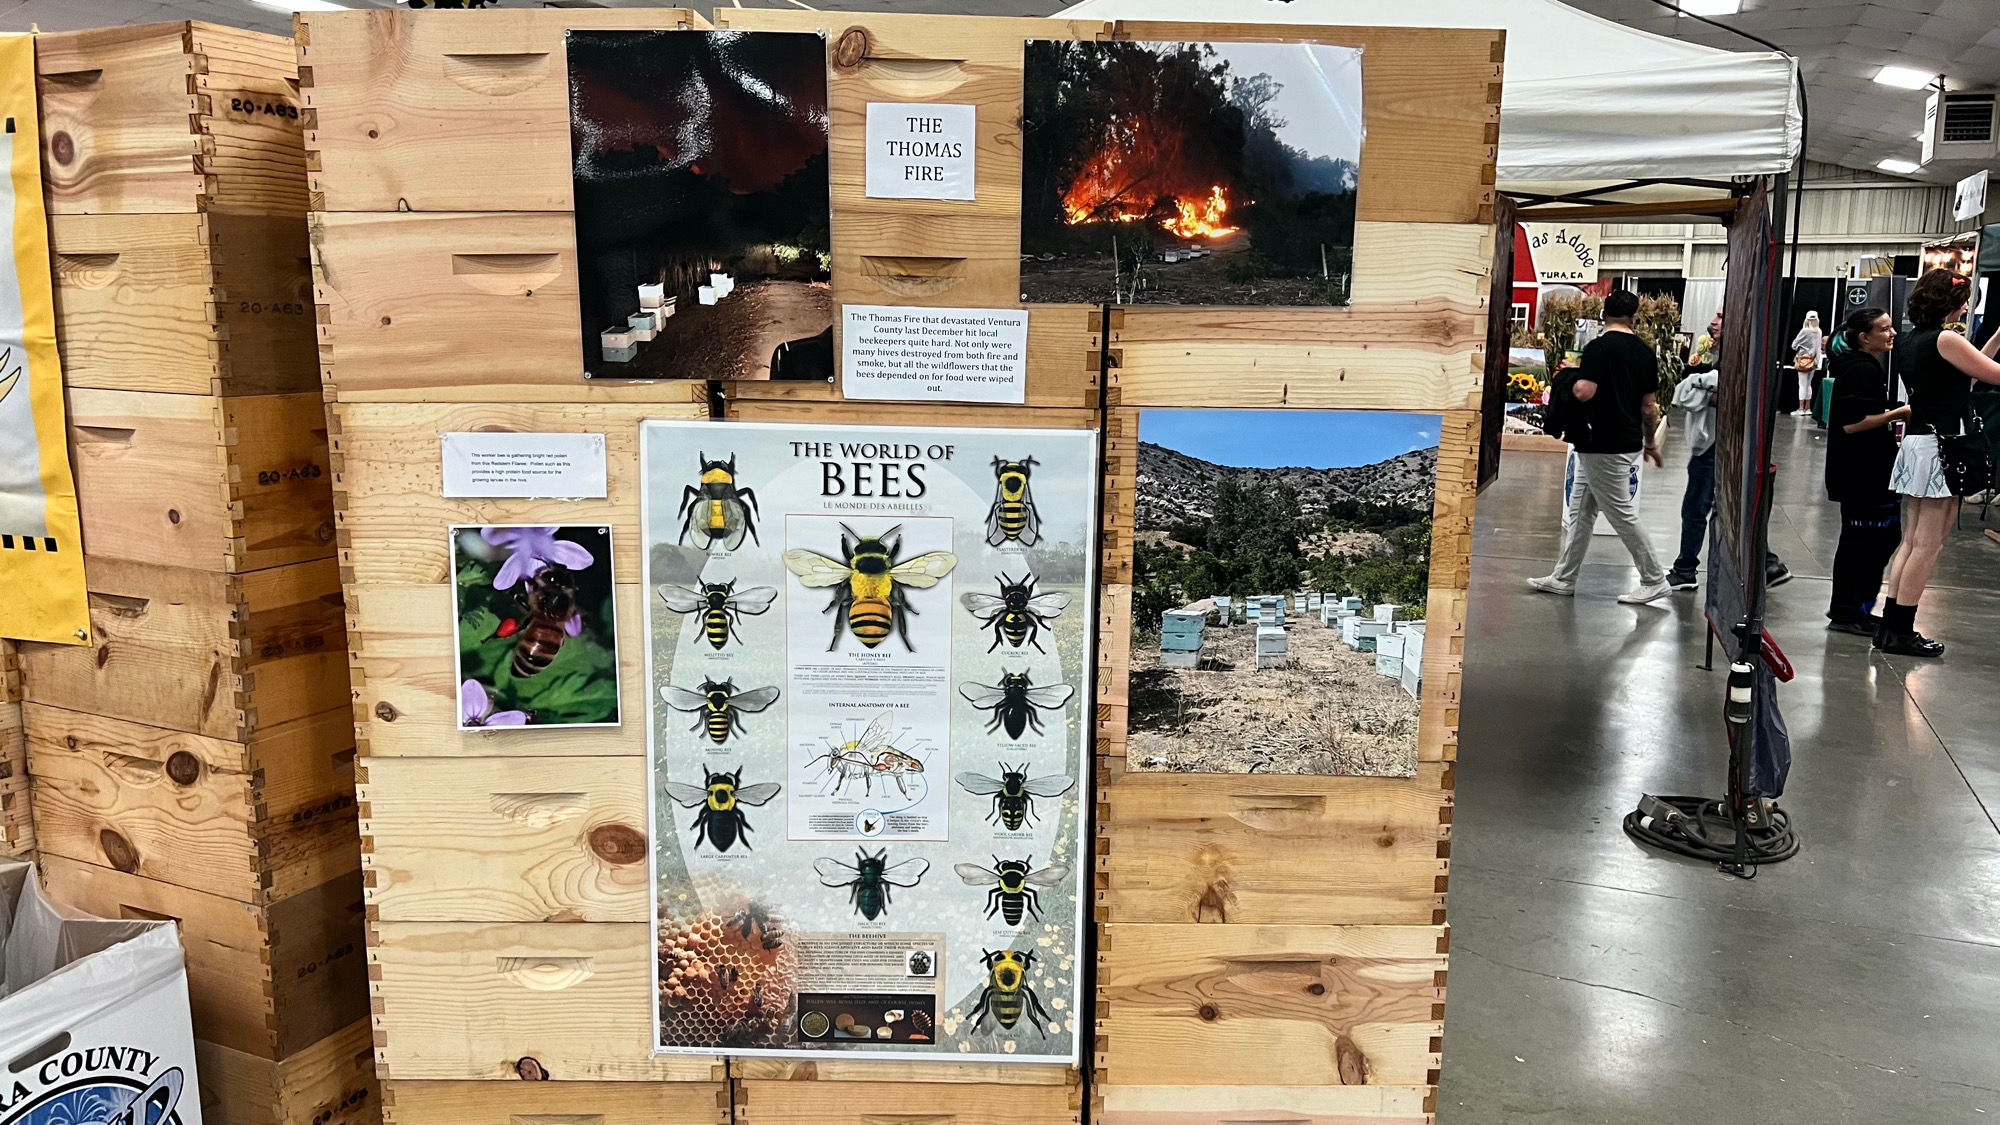 Beekeepers Association The Thomas Fire